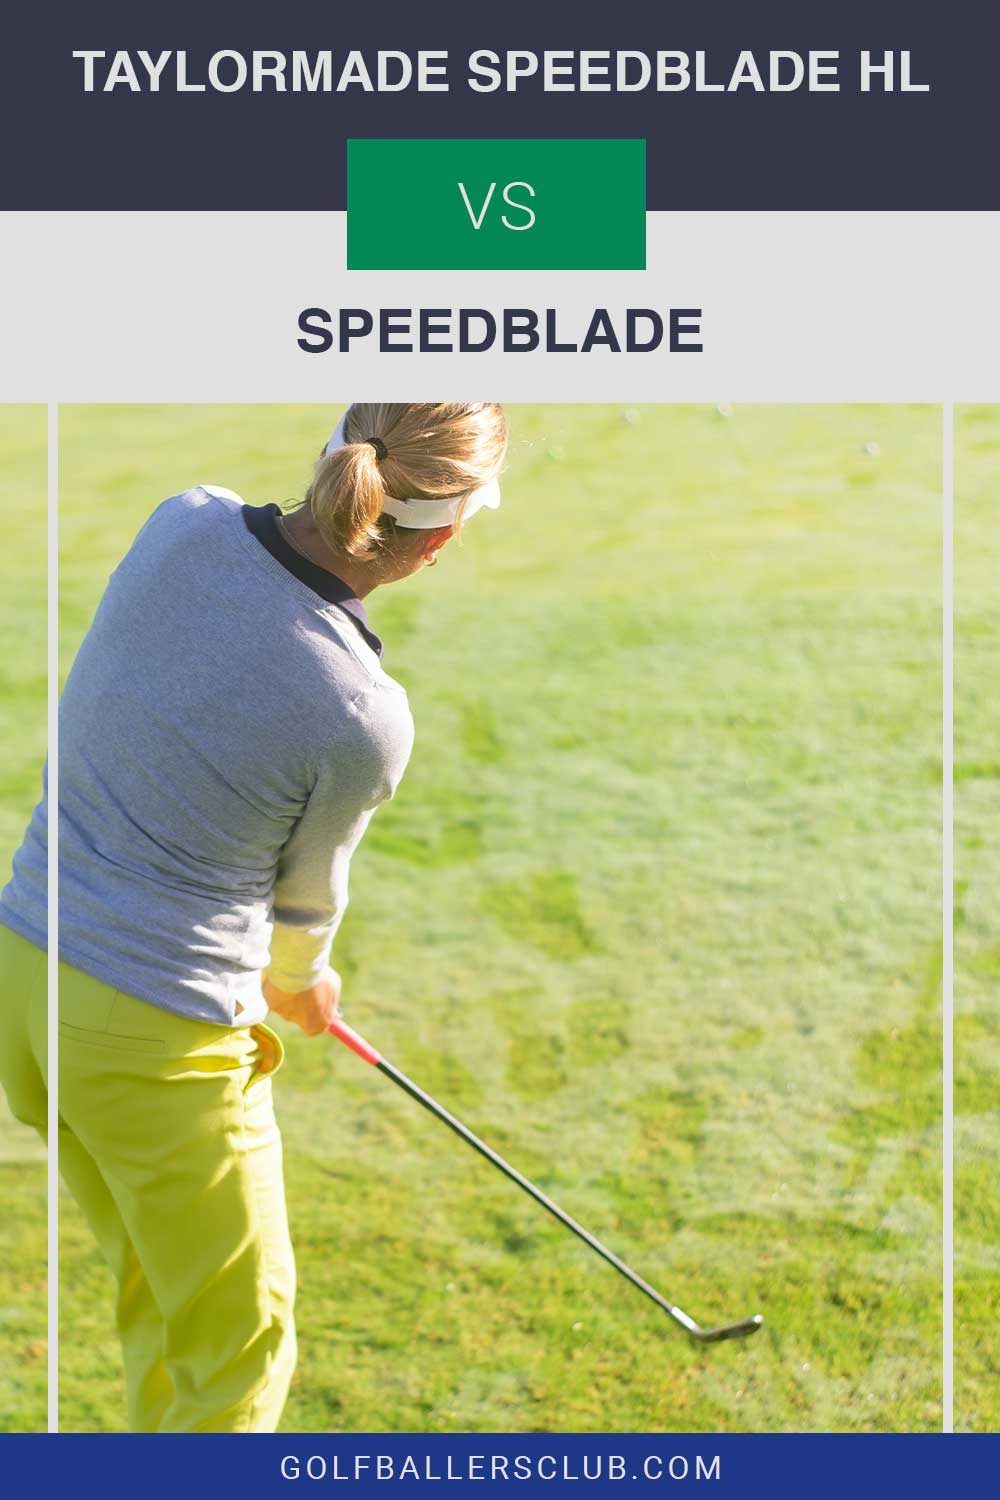 Lady wearing t shirt and pant holding a golf iron - TaylorMade Speedblade HL vs. Speedblade.